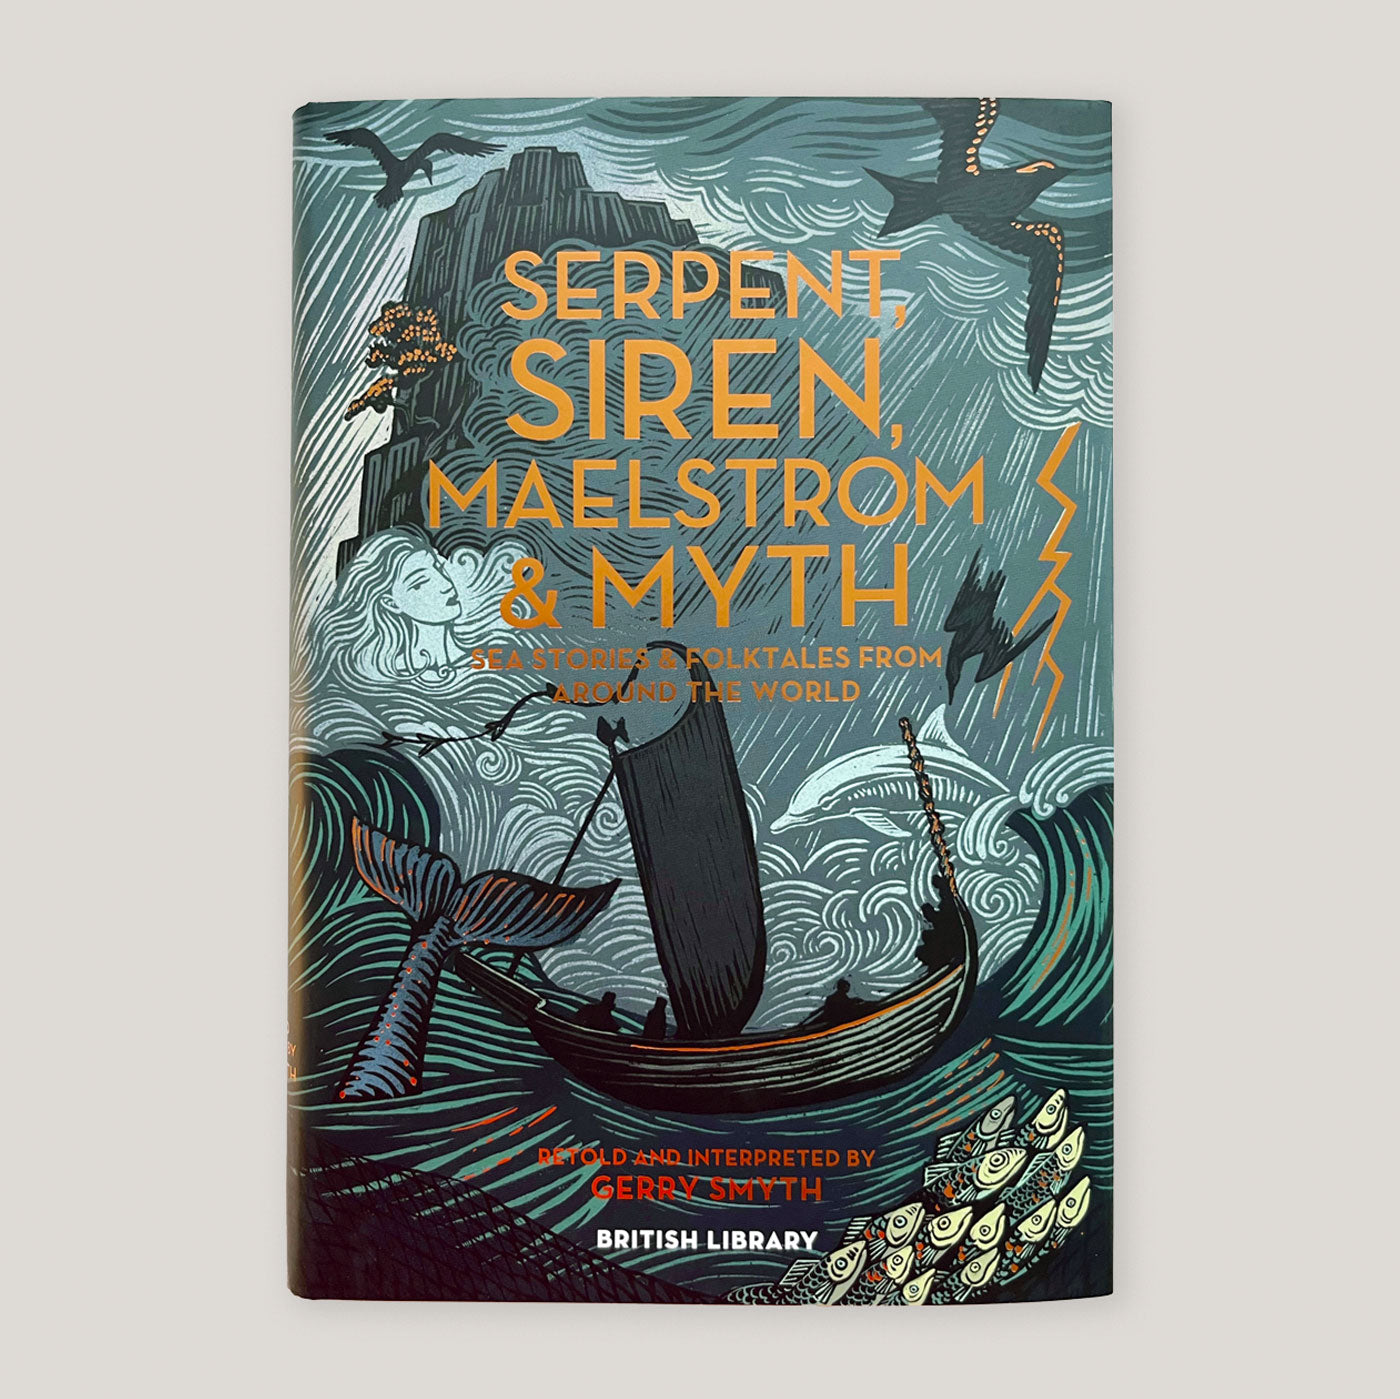 Serpent, Siren, Maelstrom & Myth Sea Stories and Folktales from Around the World | Gerry Smyth